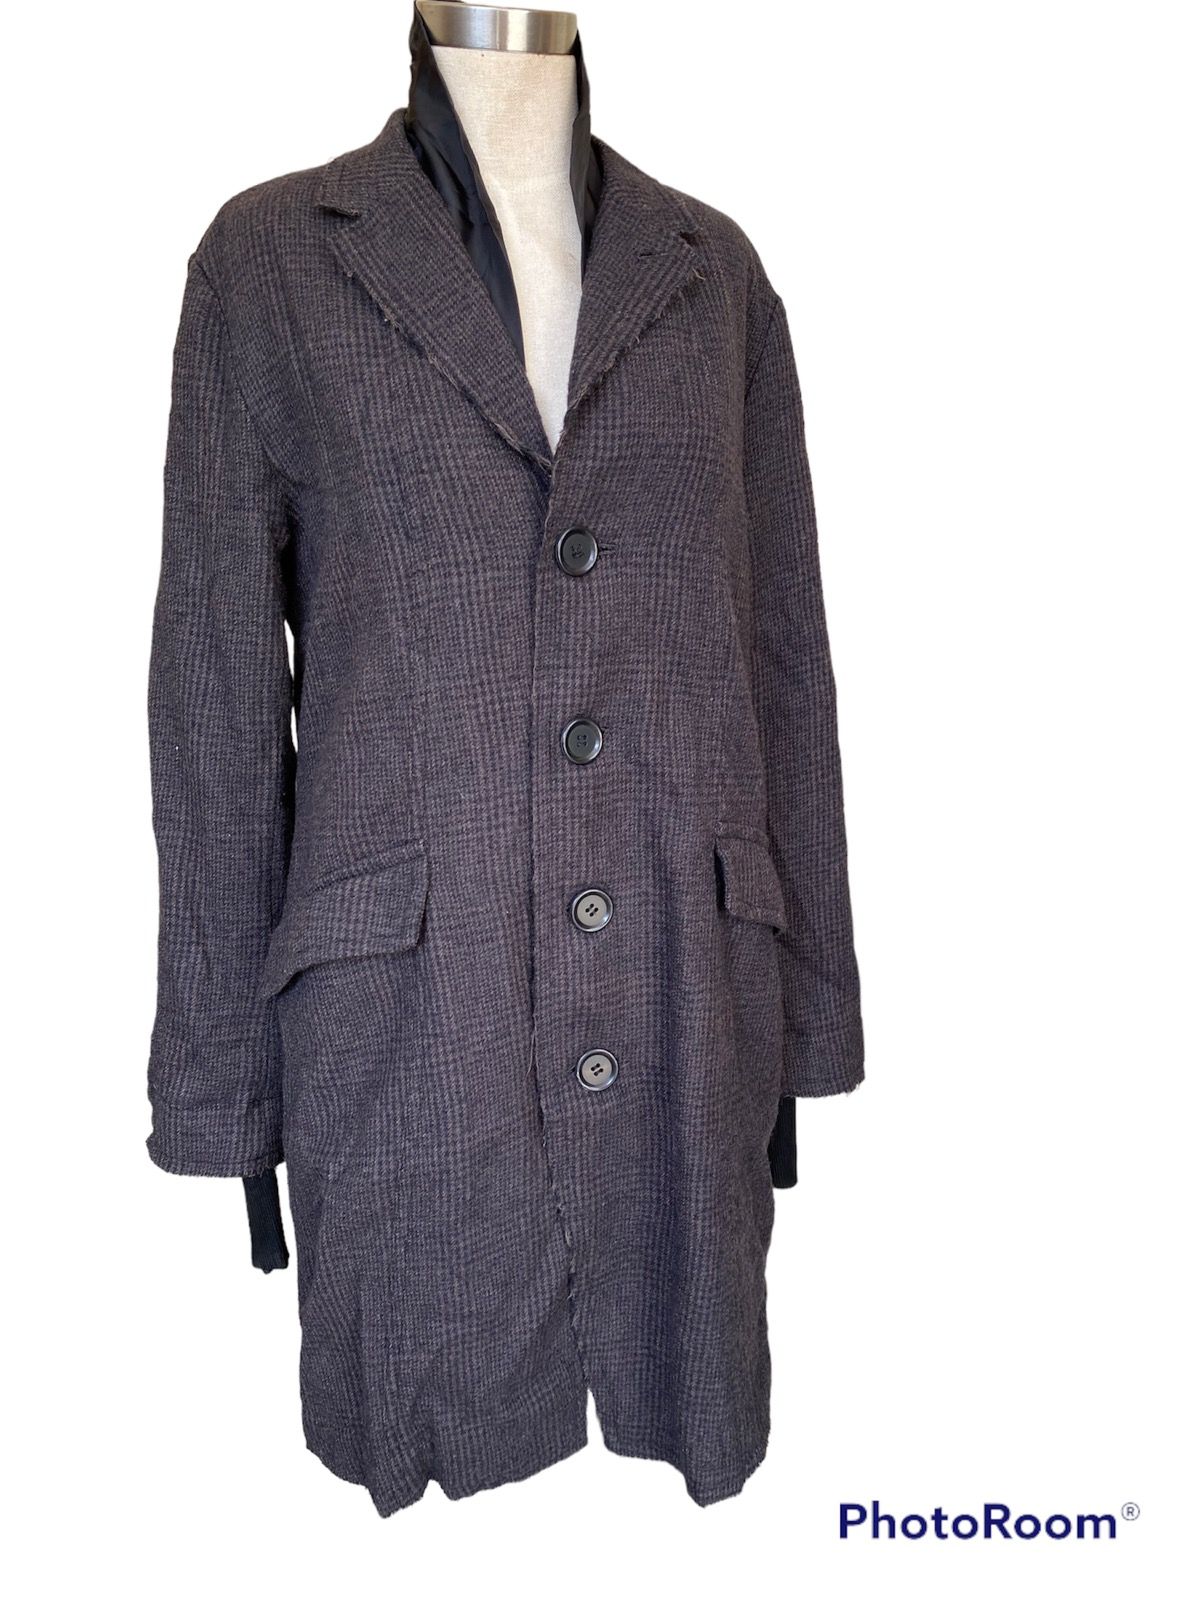 Japanese Brand longcoat Size XS / US 0-2 / IT 36-38 - 1 Preview